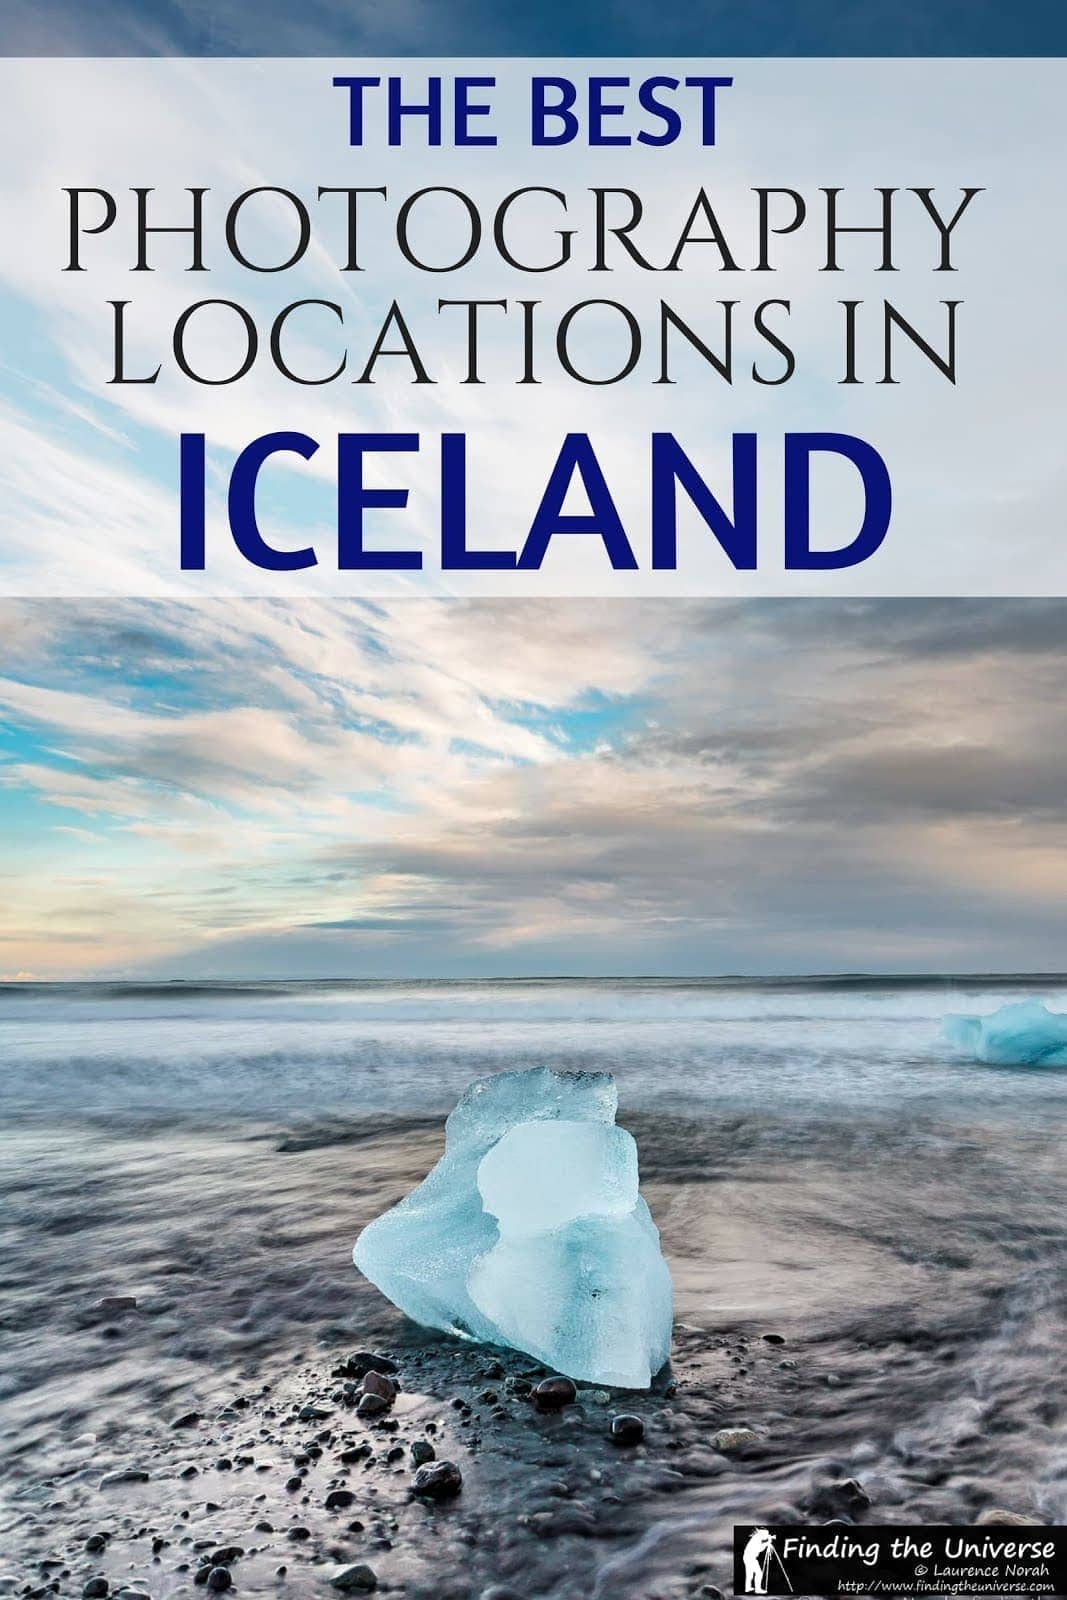 A guide to the best photography locations in Iceland, including stunning waterfalls, glaciers and landscapes, plus detailed information to help you plan your trip.